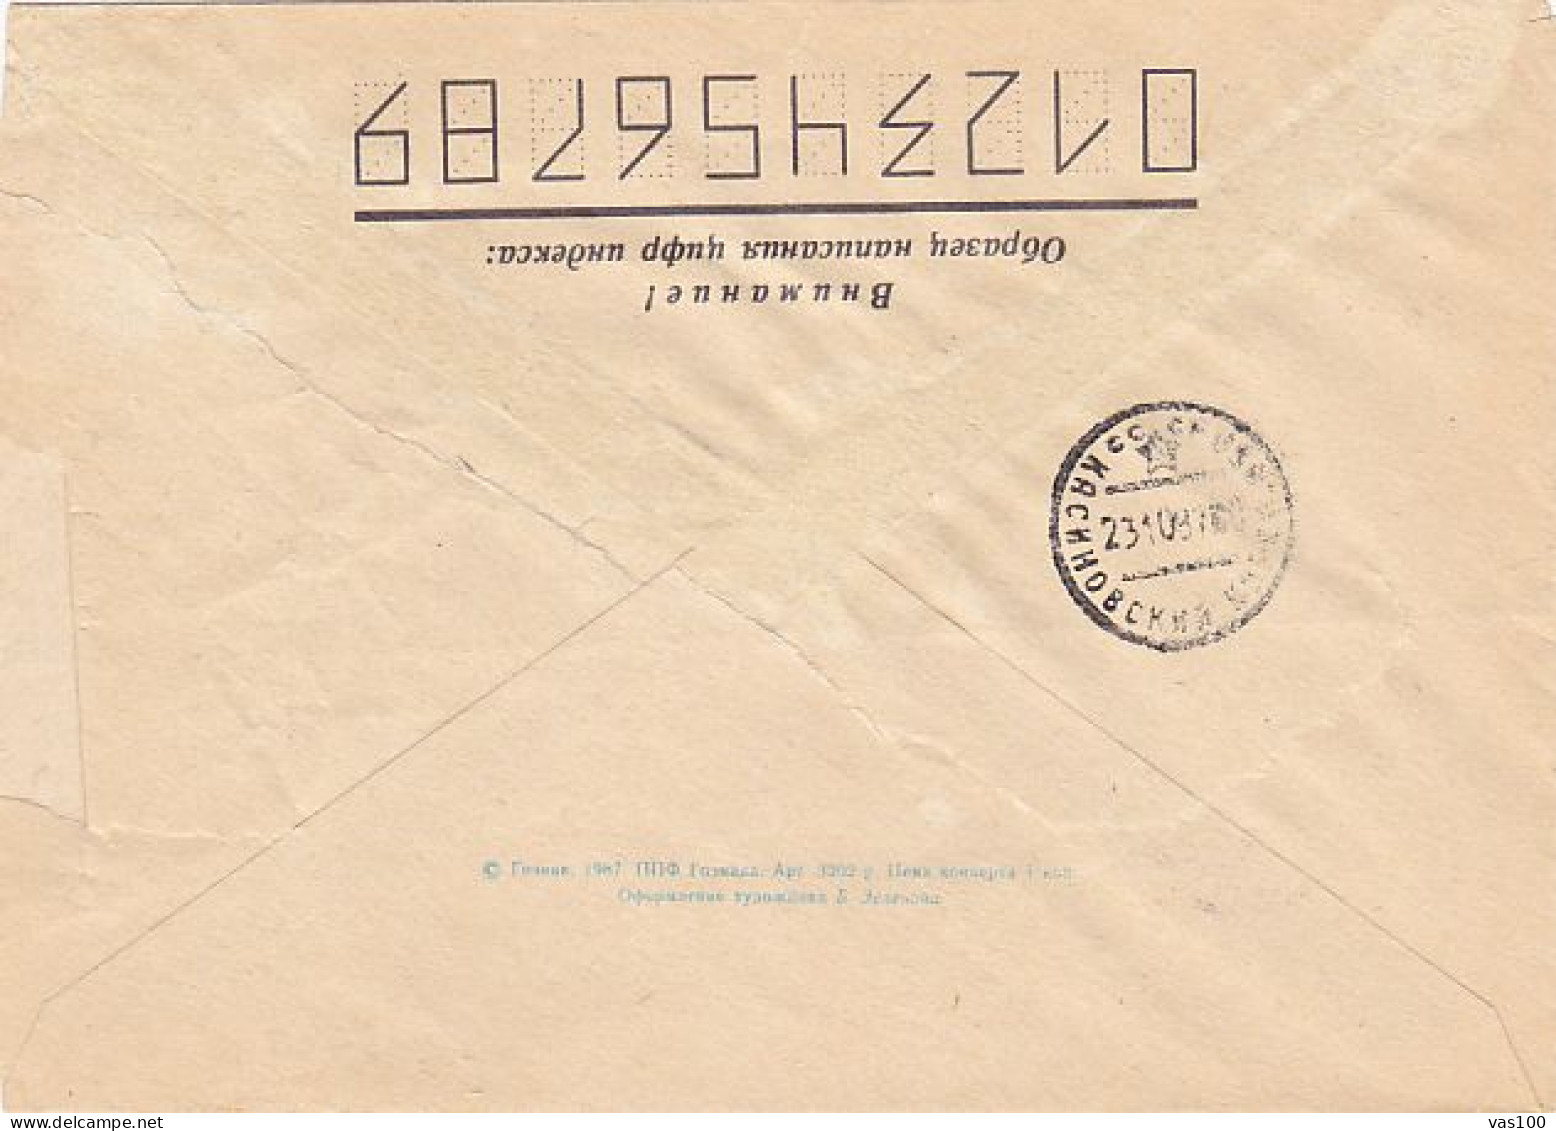 CLOCKS, WATCHES, SPECIAL COVER, 1987, RUSSIA - Horlogerie